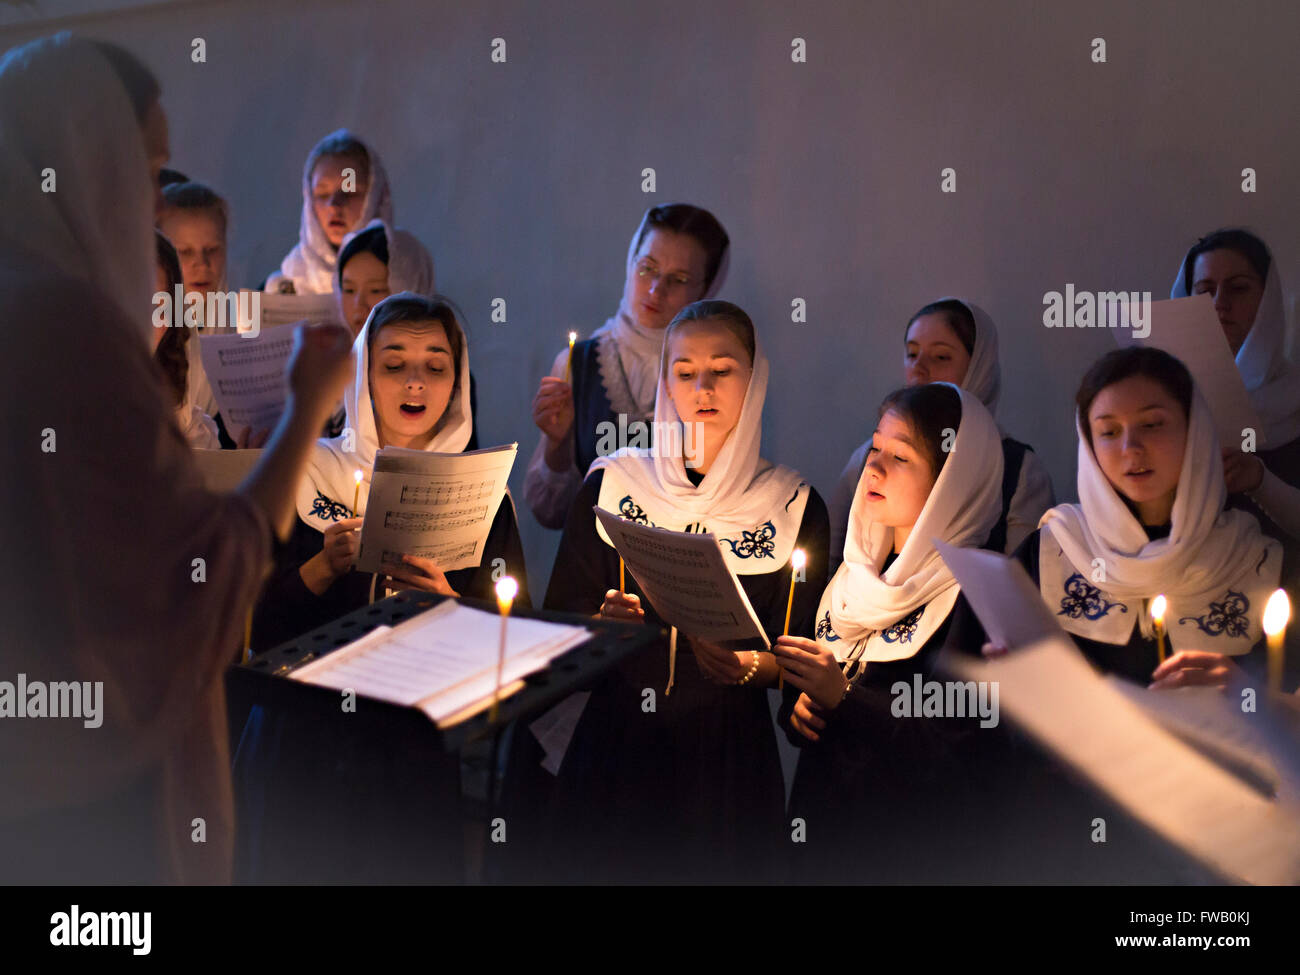 A Russian Orthodox women sing hymns during Veneration of the Cross Great Vespers service at the Theological Academy April 2, 2016 in Saint Petersburg, Russia. The veneration is held on the Third Sunday of Great Lent in accordance with Orthodox beliefs. Stock Photo